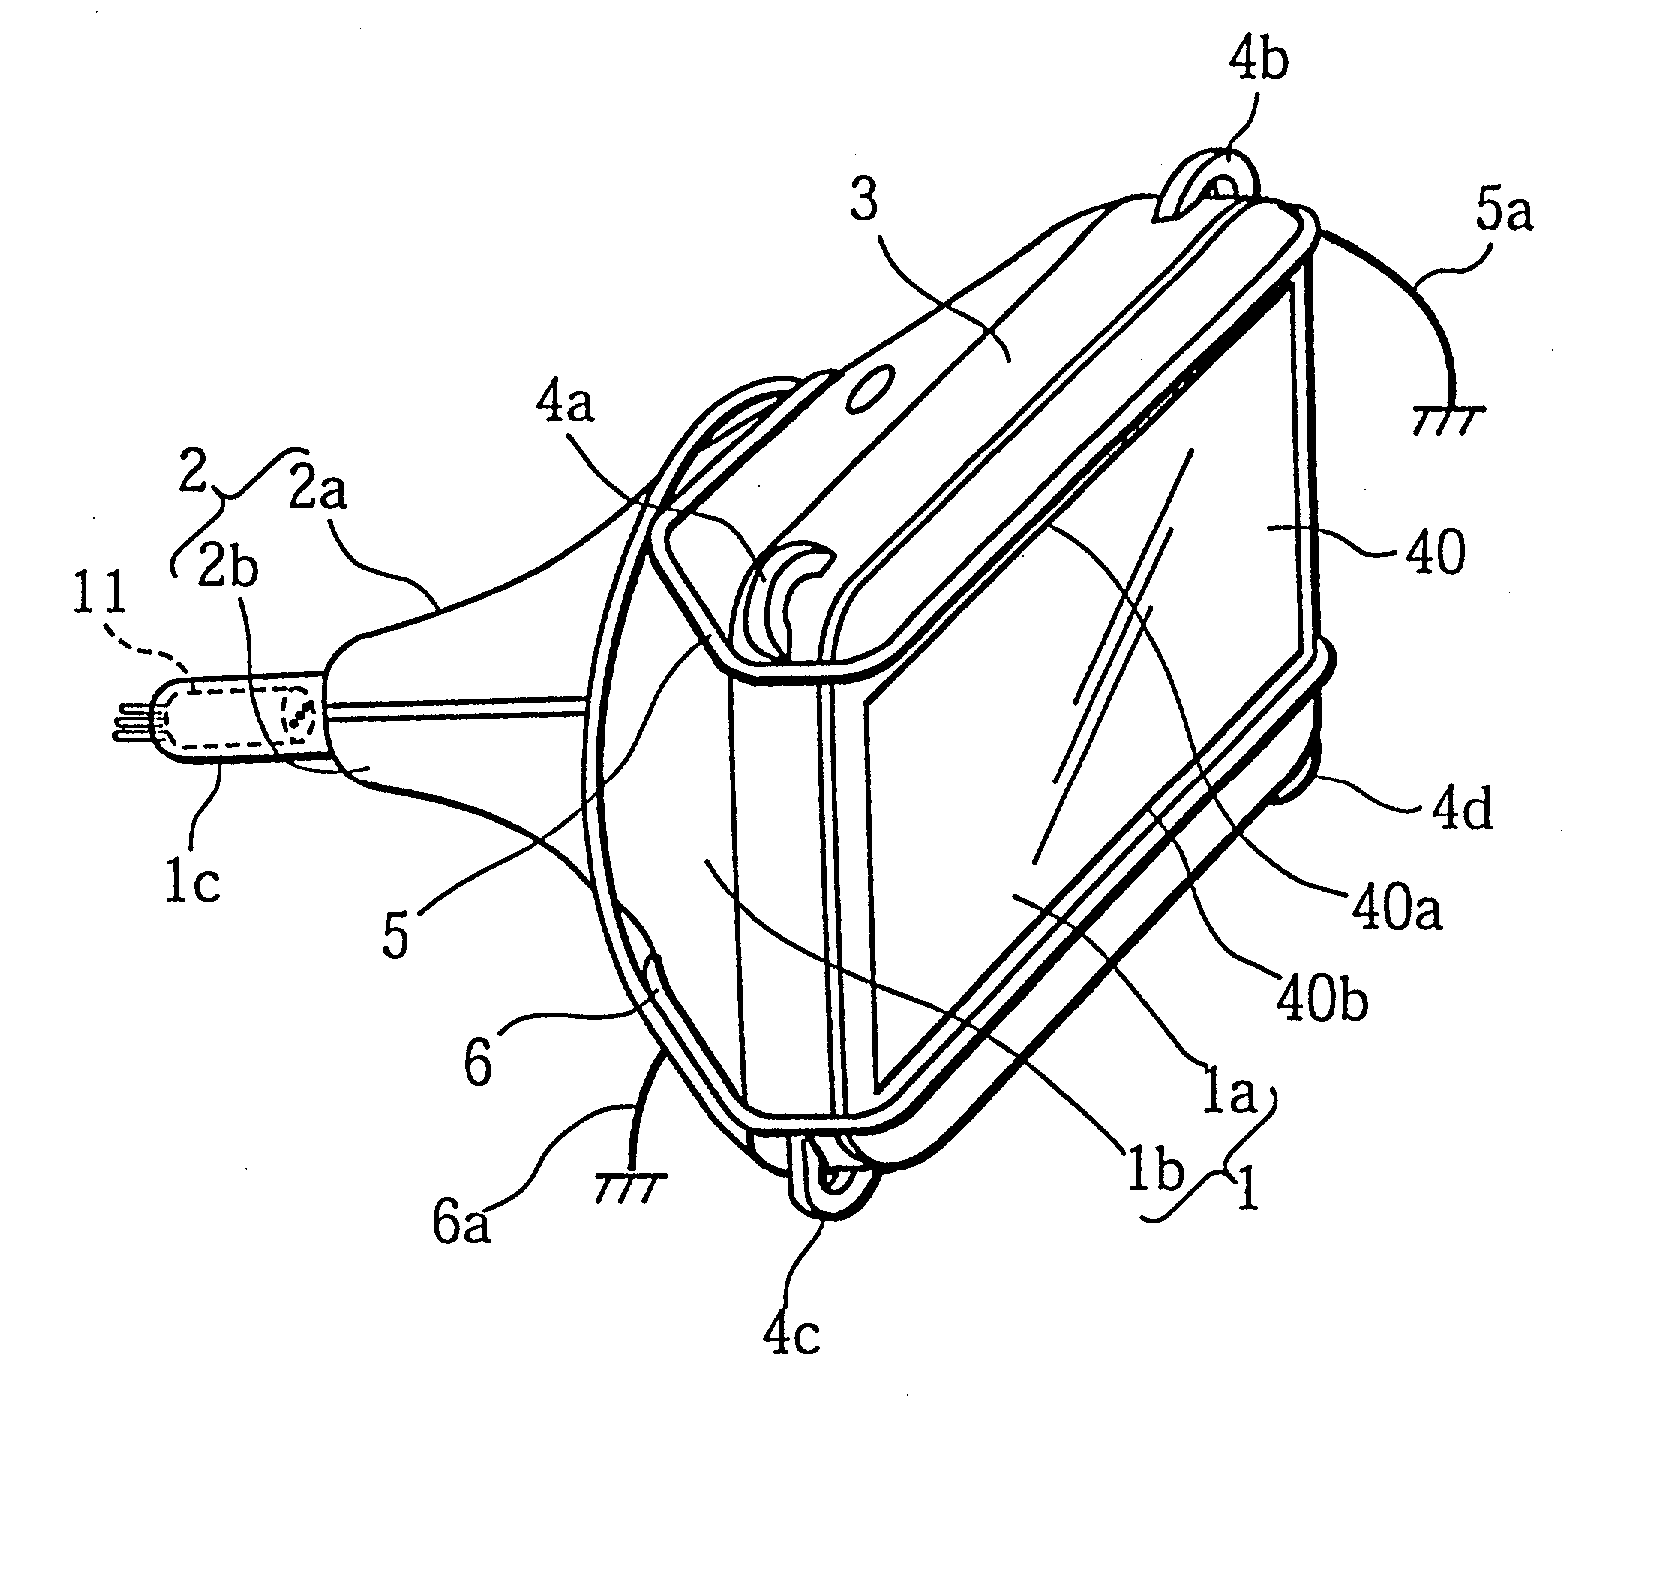 Cathode ray tube device that reduces magnetic field leakage